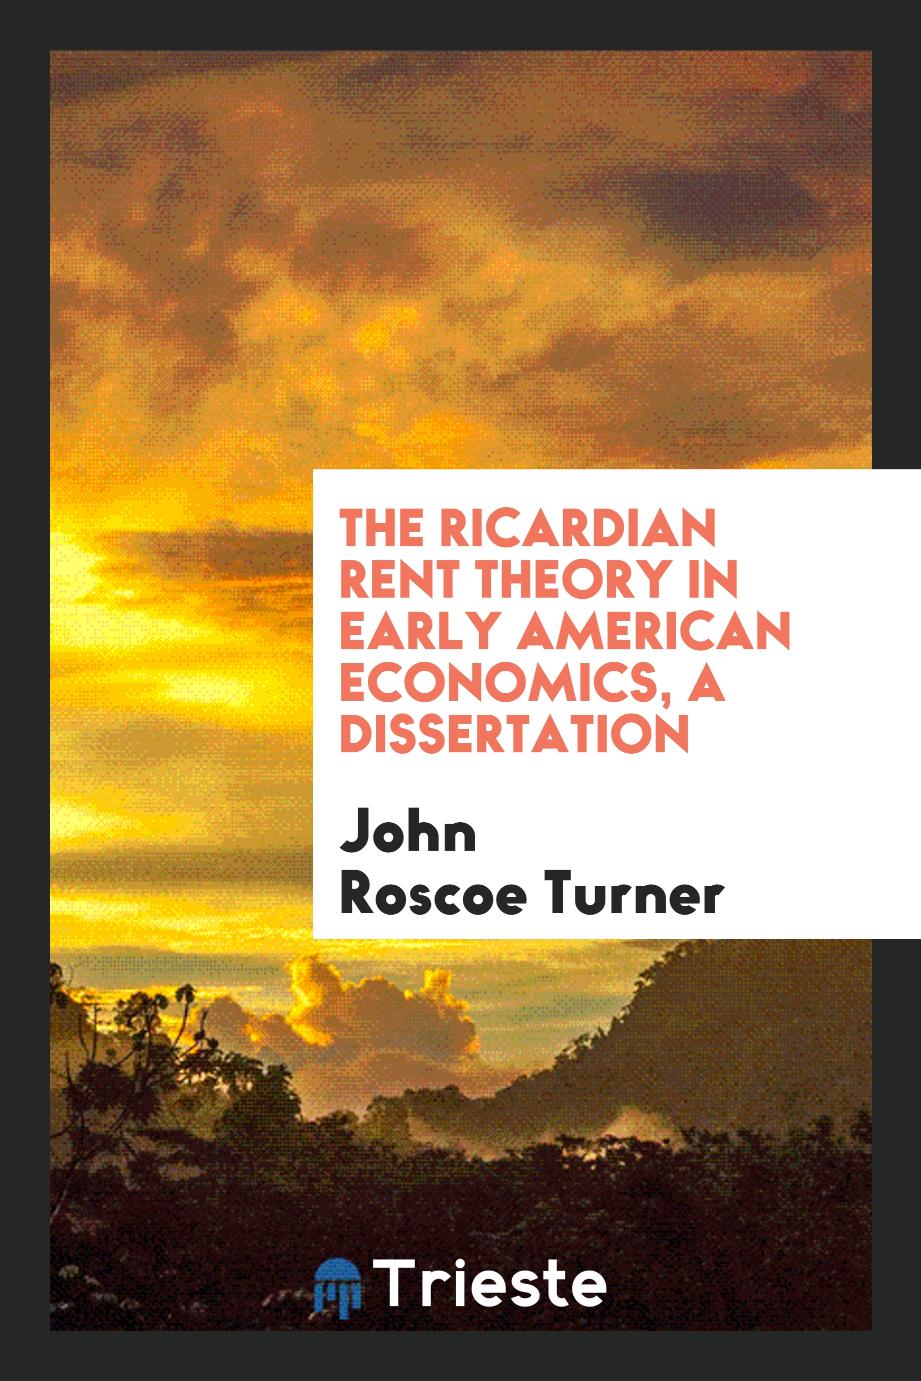 The Ricardian rent theory in early American economics, A Dissertation